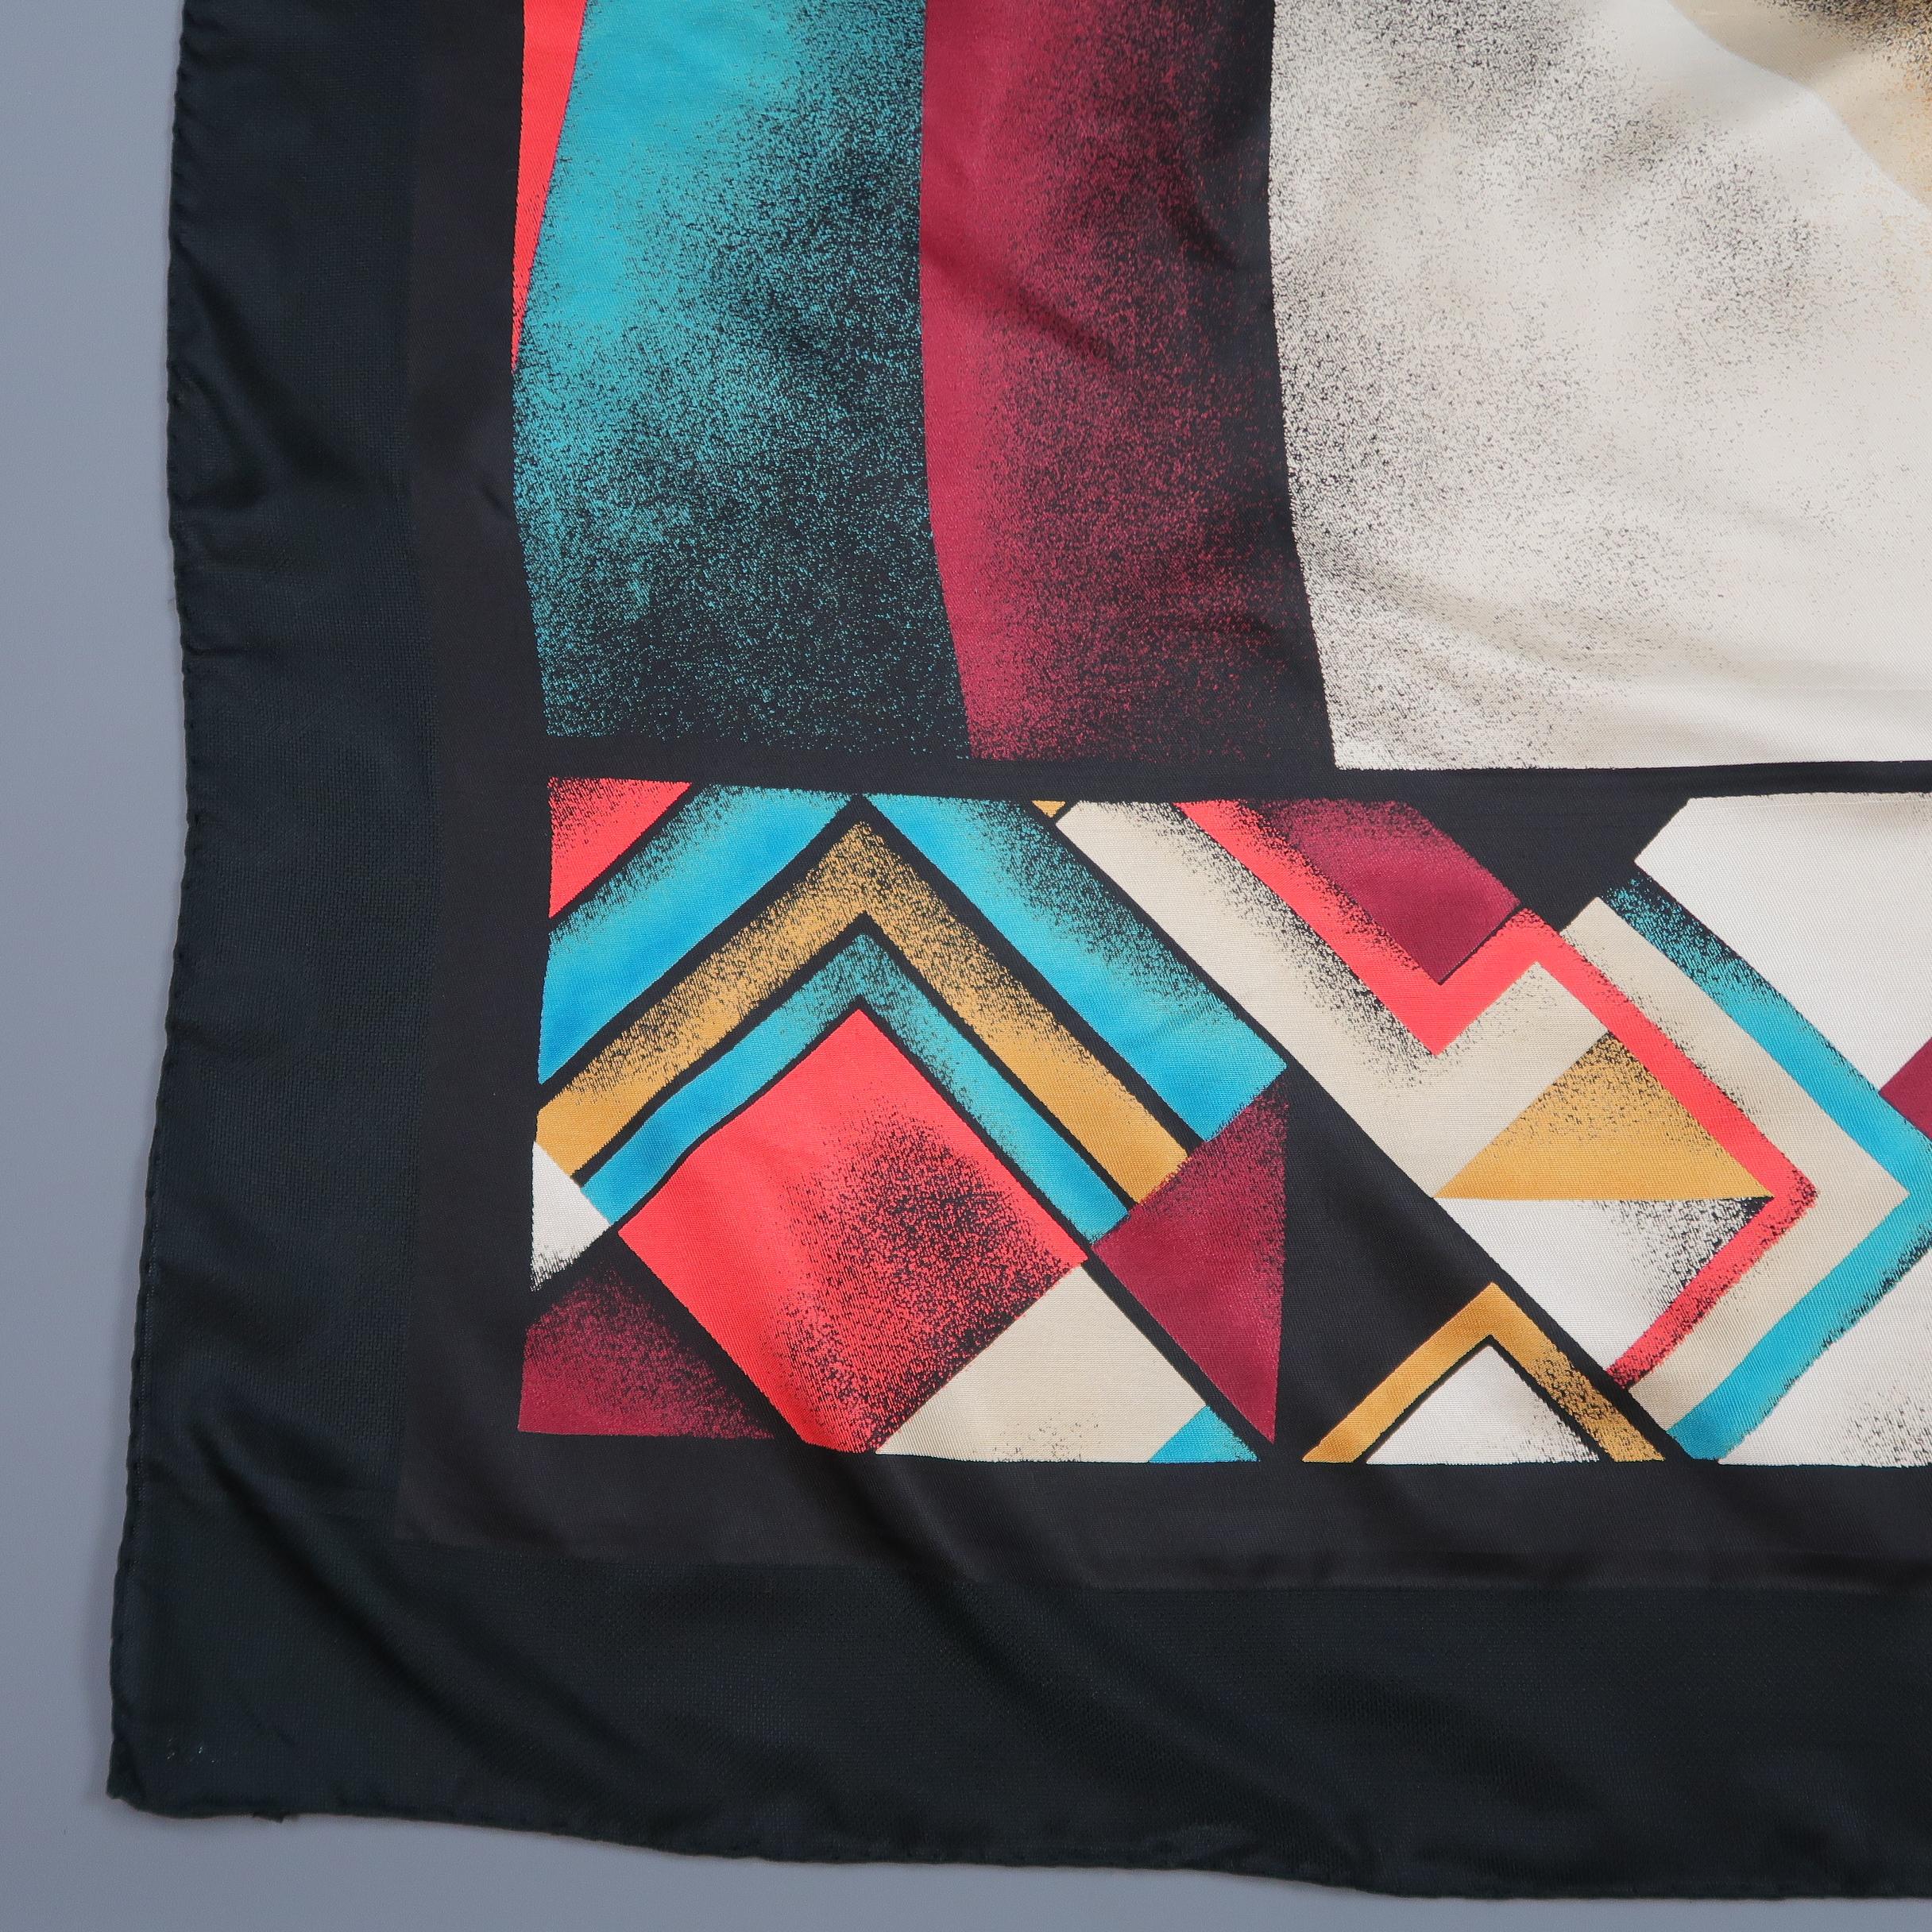 Vintage CHARLES JOURDAN oversized shawl scarf comes in black silk twill with woven trim and an abstract geometric art print throughout. No signs of wear. Made in Italy.
 
New without Tags.
 
55 in X 55 in.